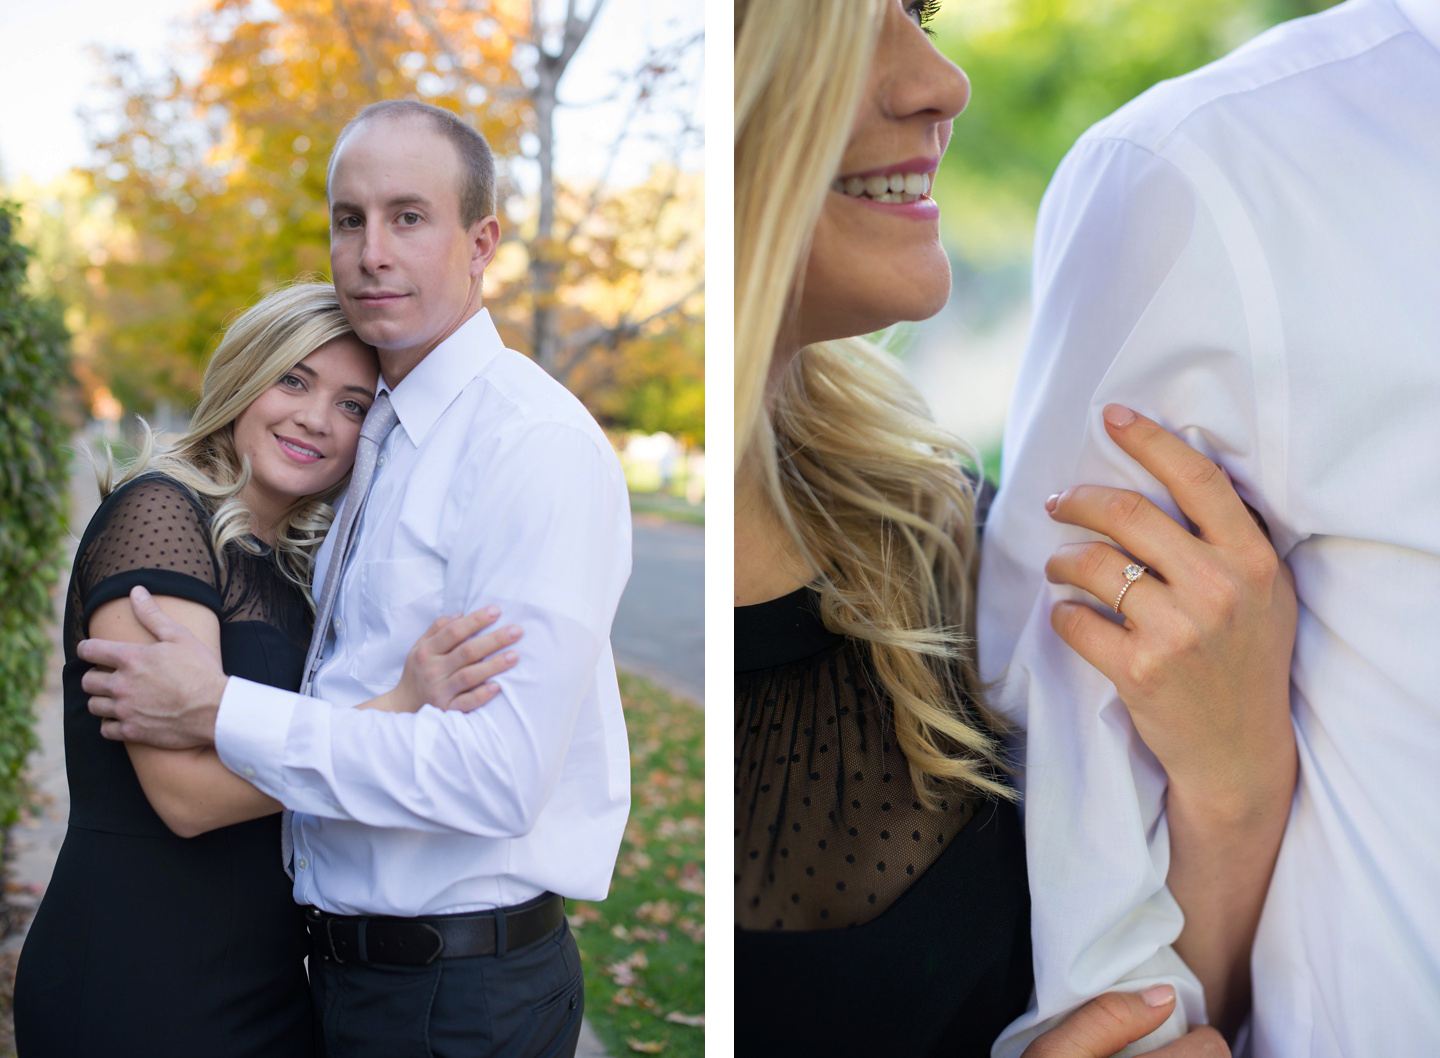 Jordan and Leo Engagement Photography by The Aperture Company